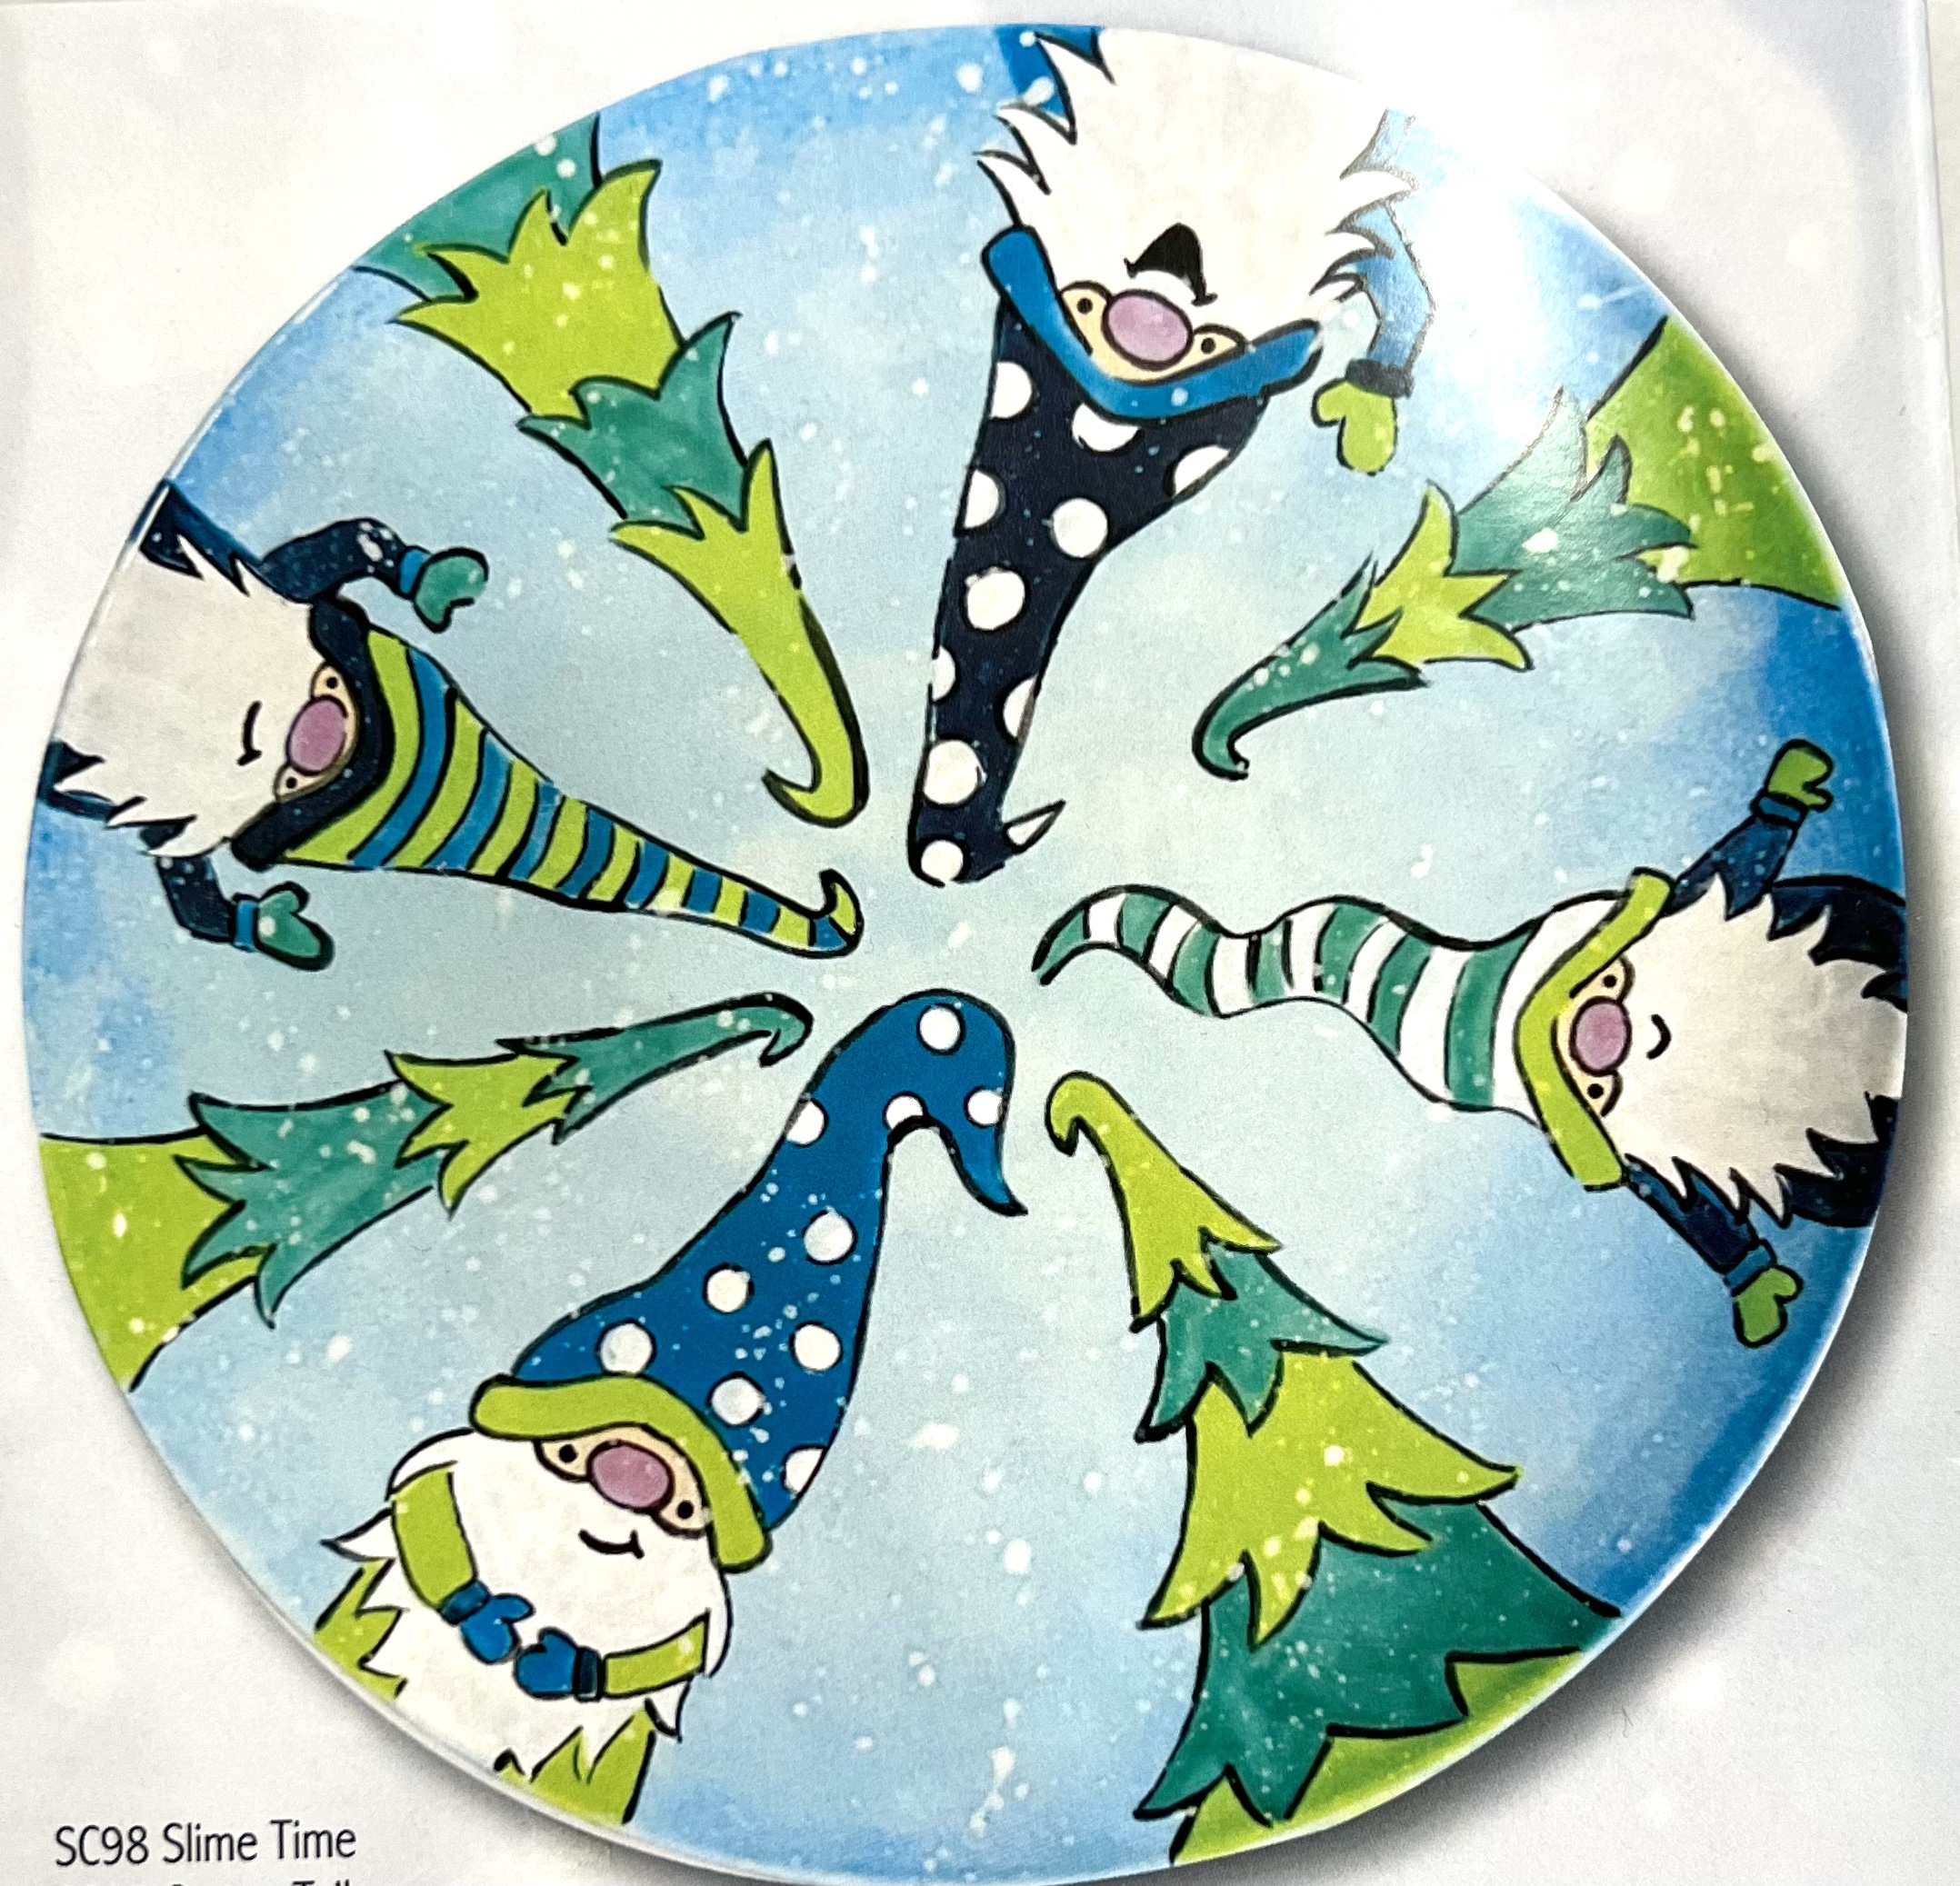 Winter Gnomes Platter - Pottery Painting Class